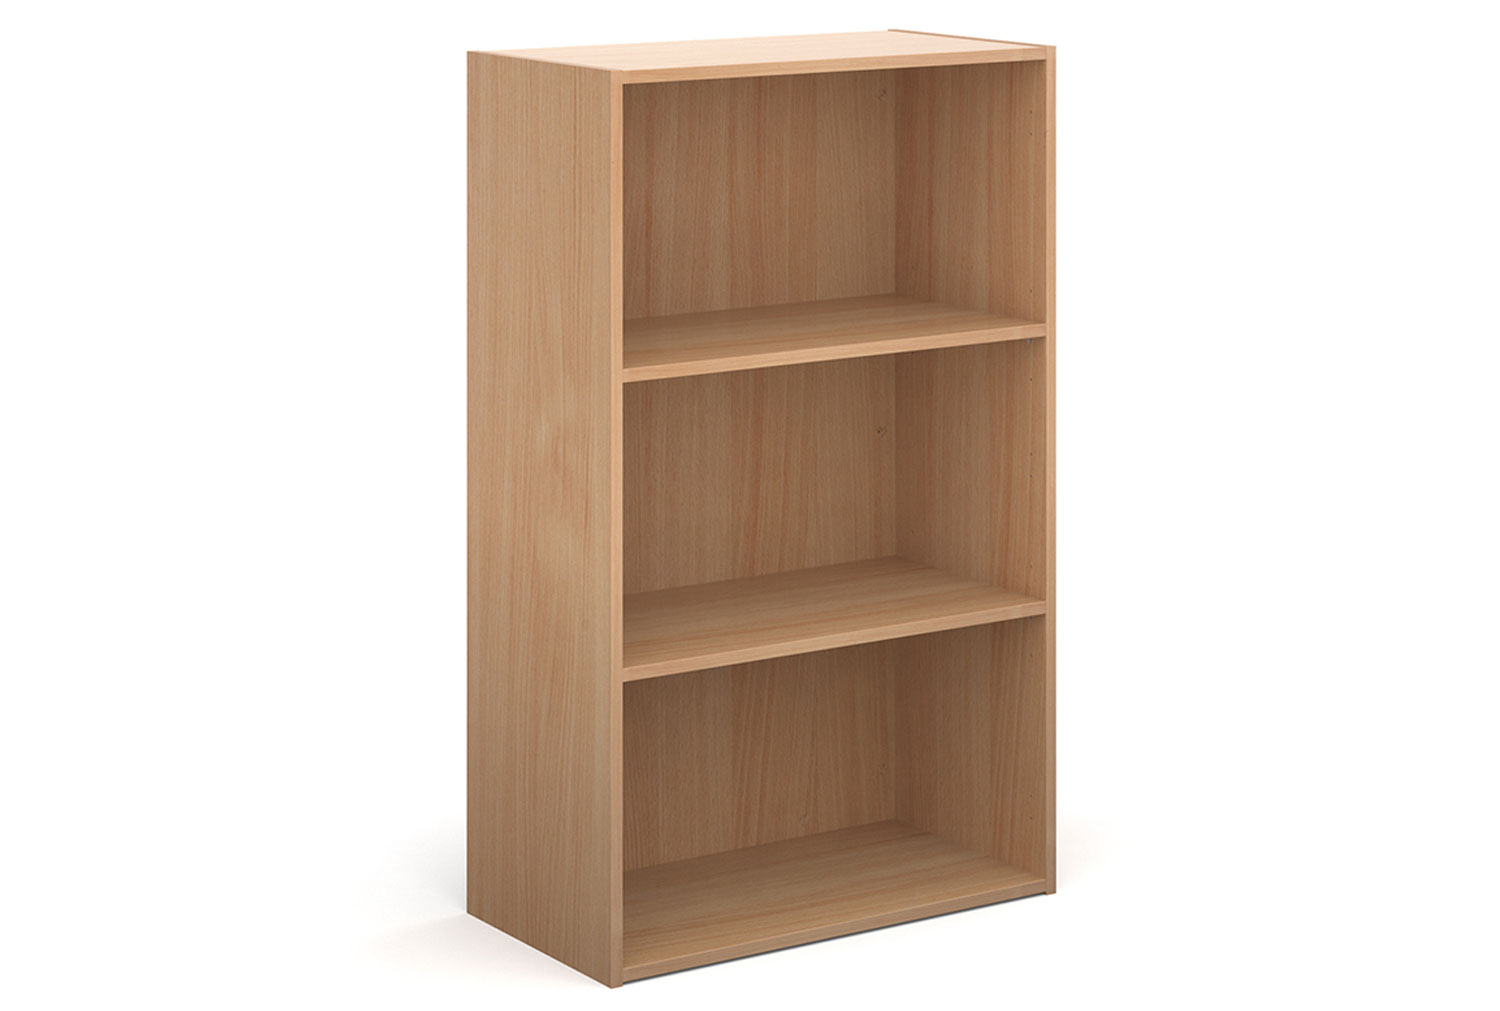 Value Line Classic+ Office Bookcases, 2 Shelf - 76wx39dx123h (cm), Beech, Express Delivery